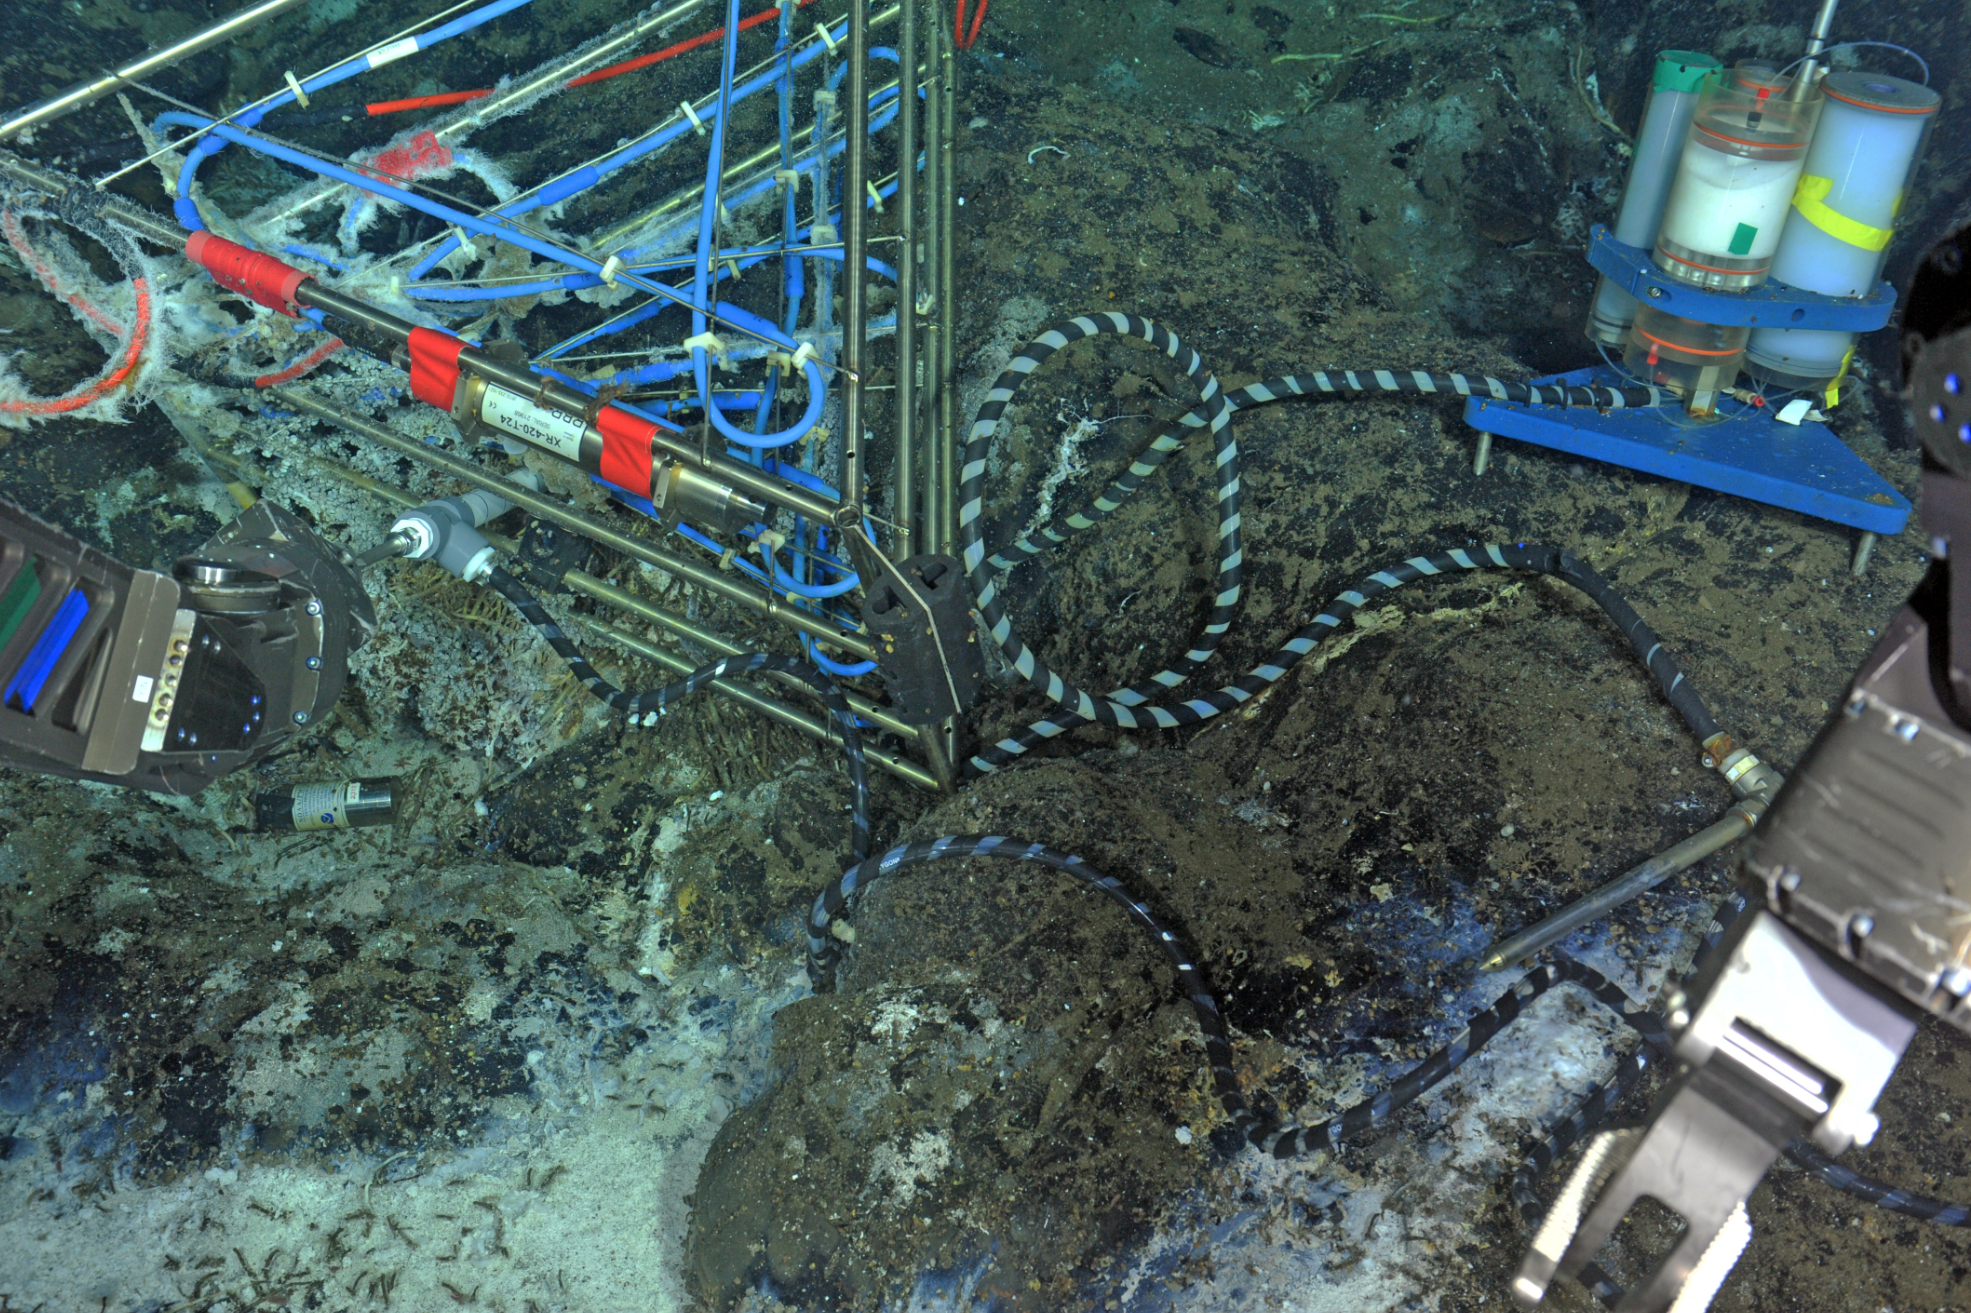 An Osmotic fluid sampler is installed in a small diffuse flow site hosting abundant tubeworms, limpets, and palm worms in the ASHES hydrothermal fluid. When recovered next year, the fluids this sampler host will provide information on how vent fluid chemistry changes over time. Credit: NSF-OOI/UW/ISS; Dive R1835; V15.